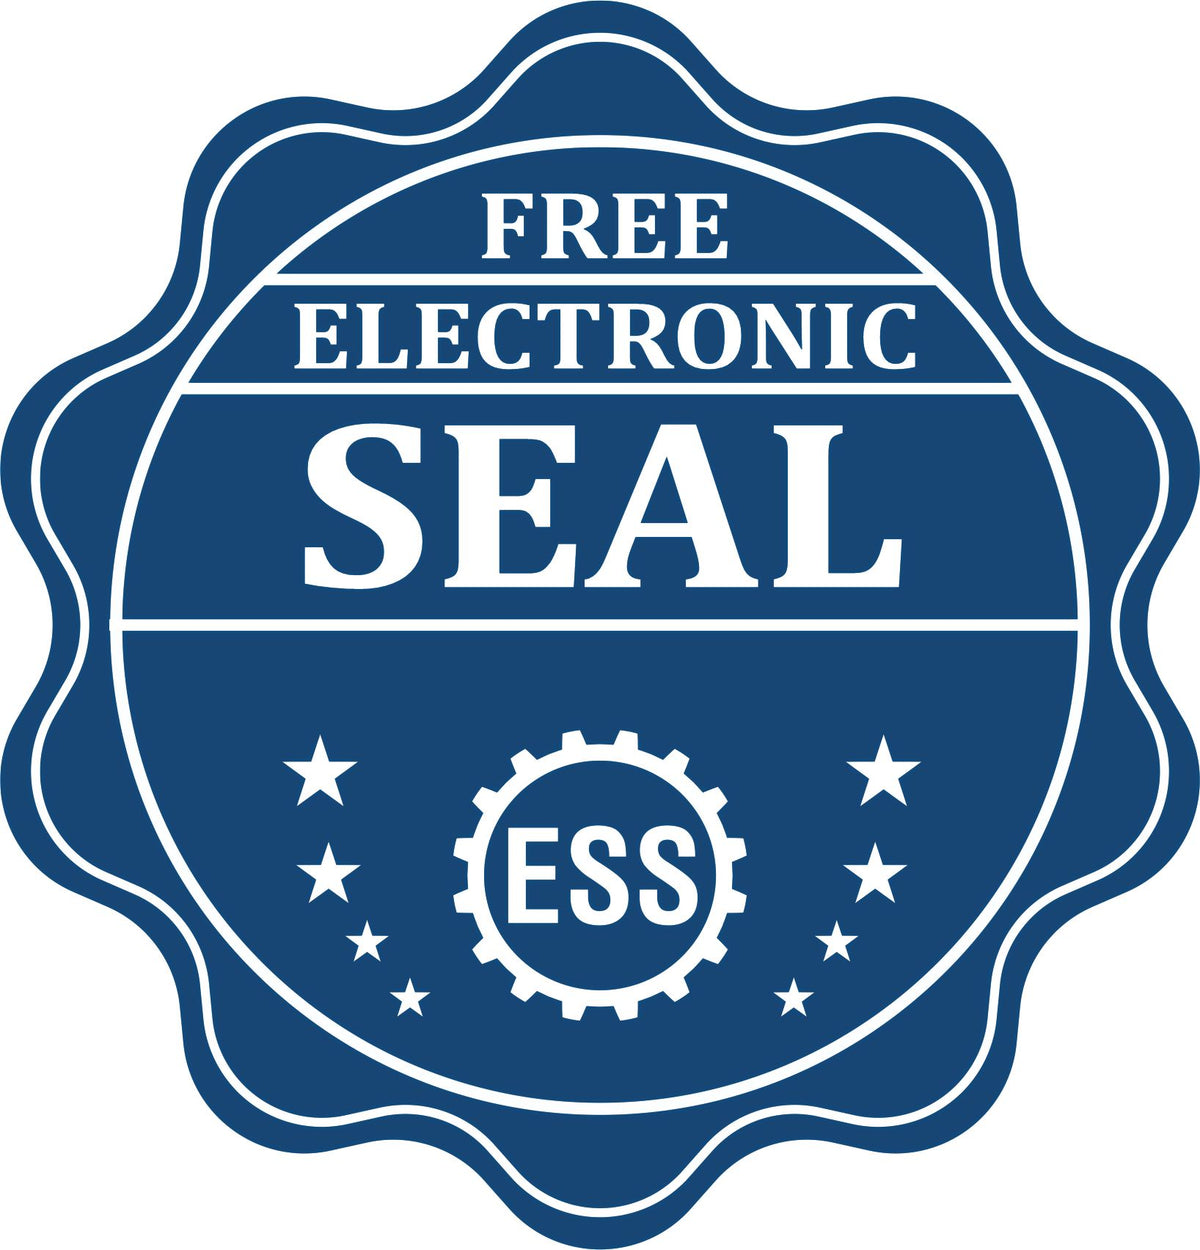 A badge showing a free electronic seal for the State of Oklahoma Soft Land Surveyor Embossing Seal with stars and the ESS gear on the emblem.